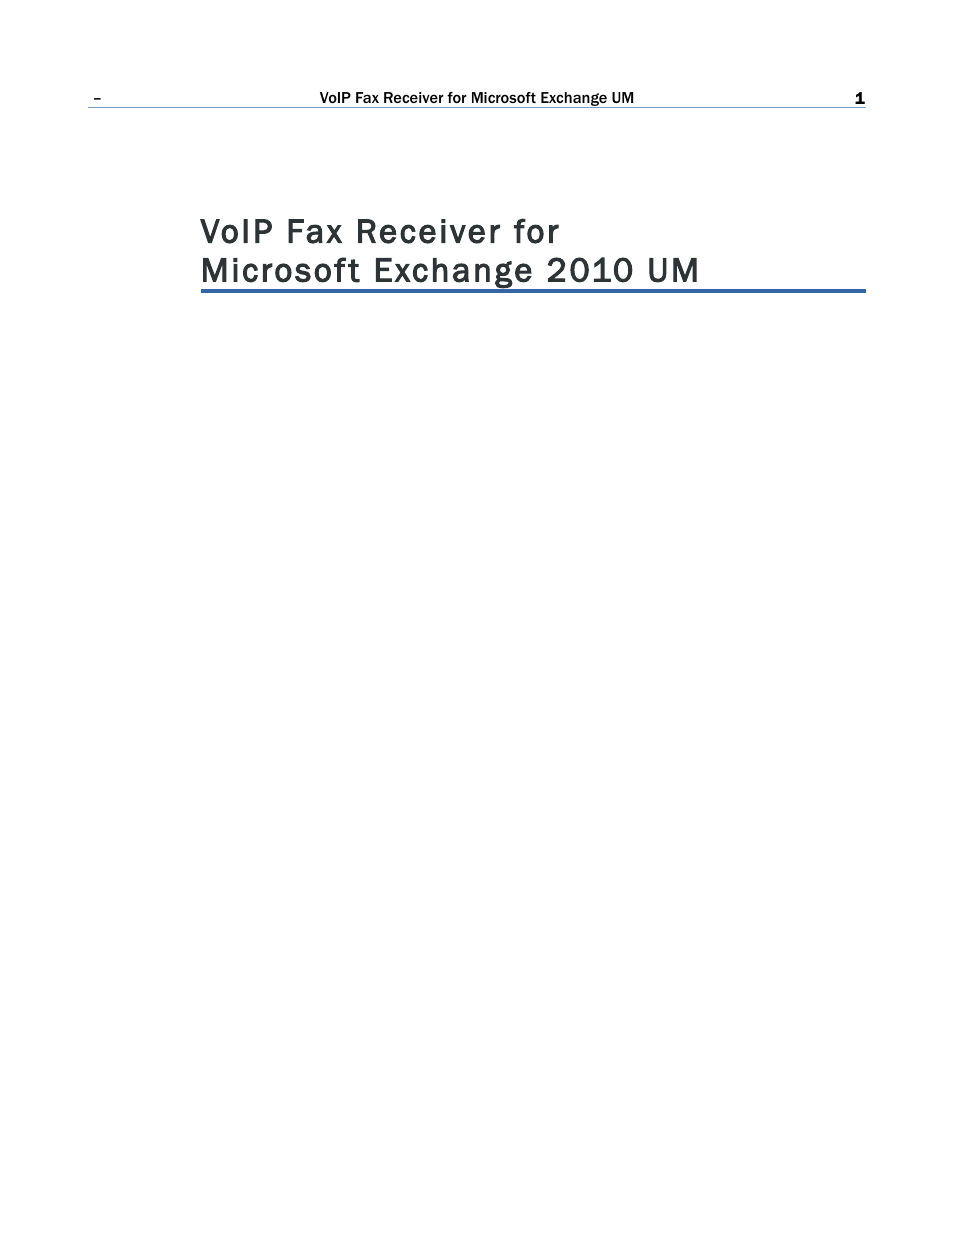 VoIP Fax Receiver for Microsoft Exchange 2010 UM